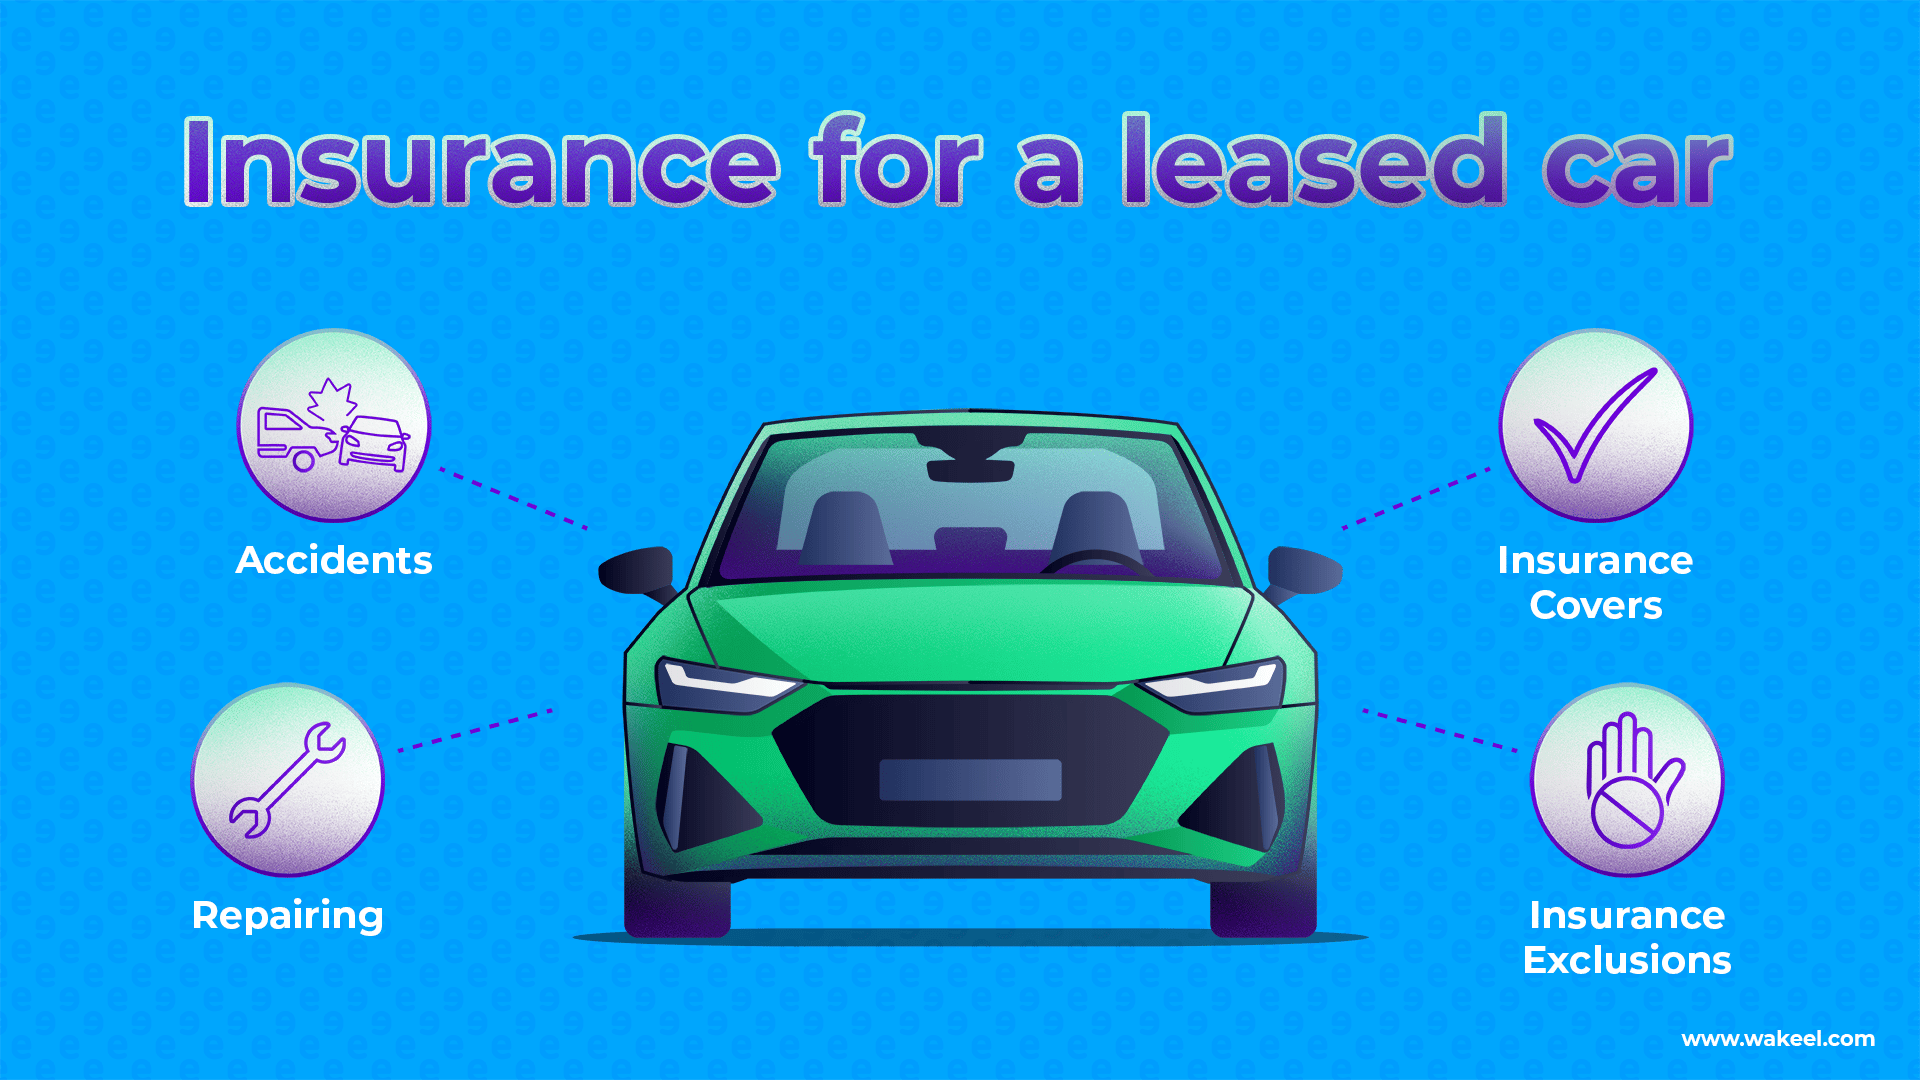 Lease to own car insurance in Saudi